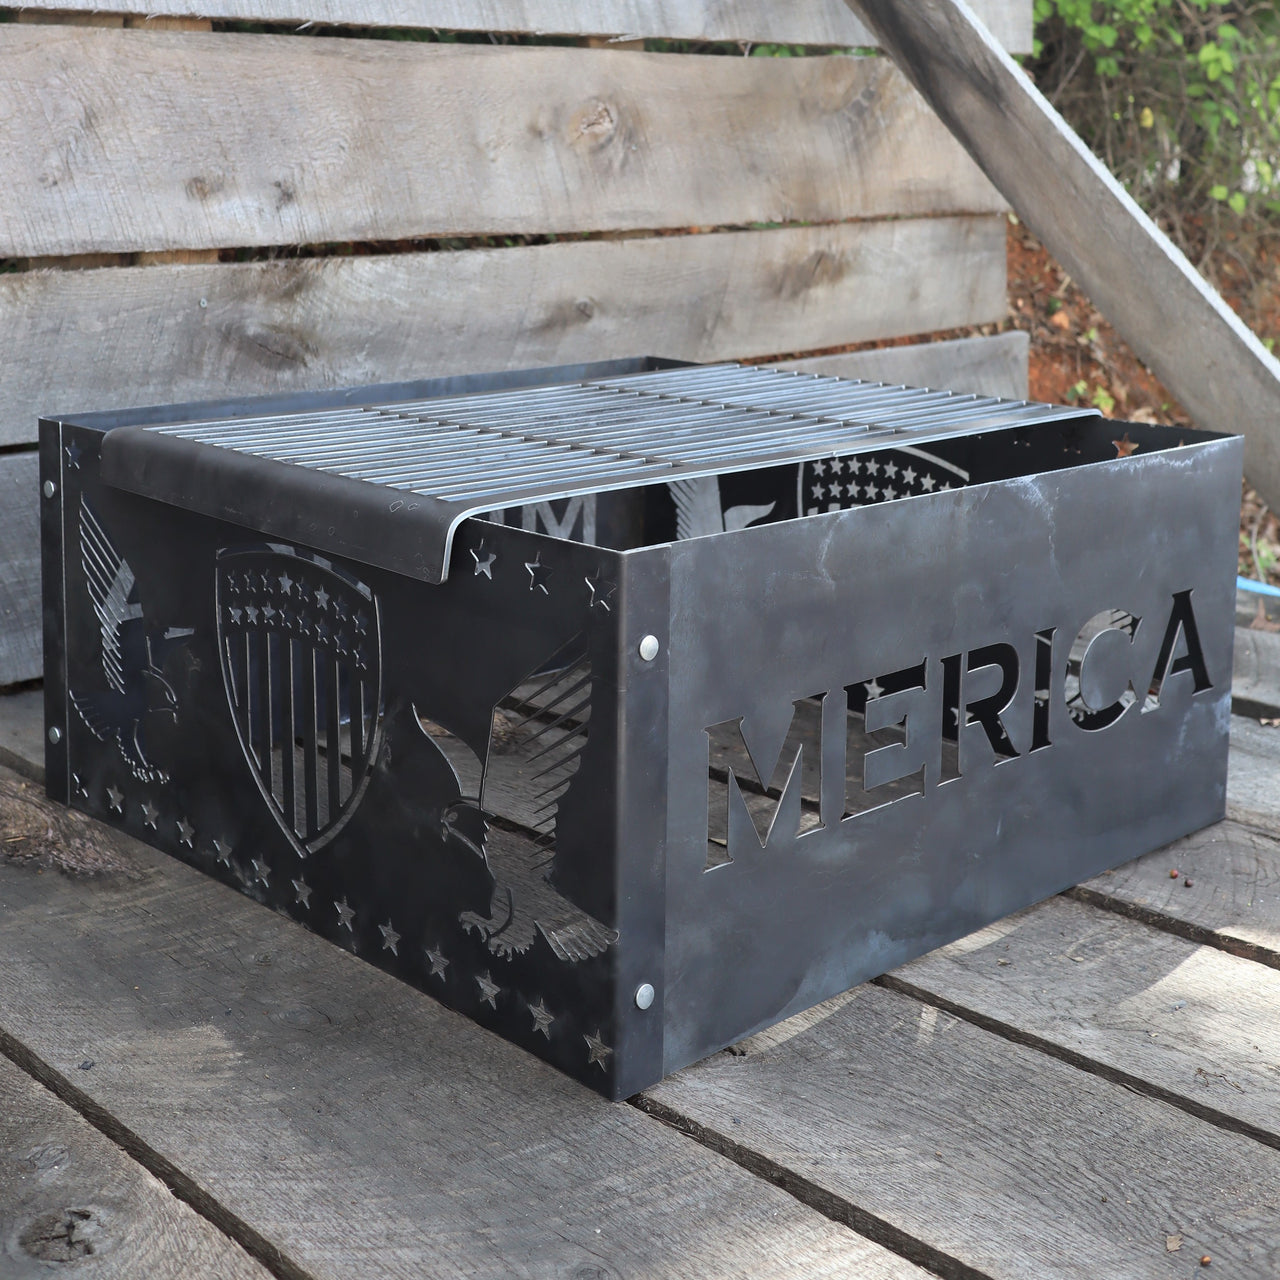 Steel Fire Pit Grill - Metal Outdoor Backyard Cooking Grate - Fourth of July Patio Camping Decor